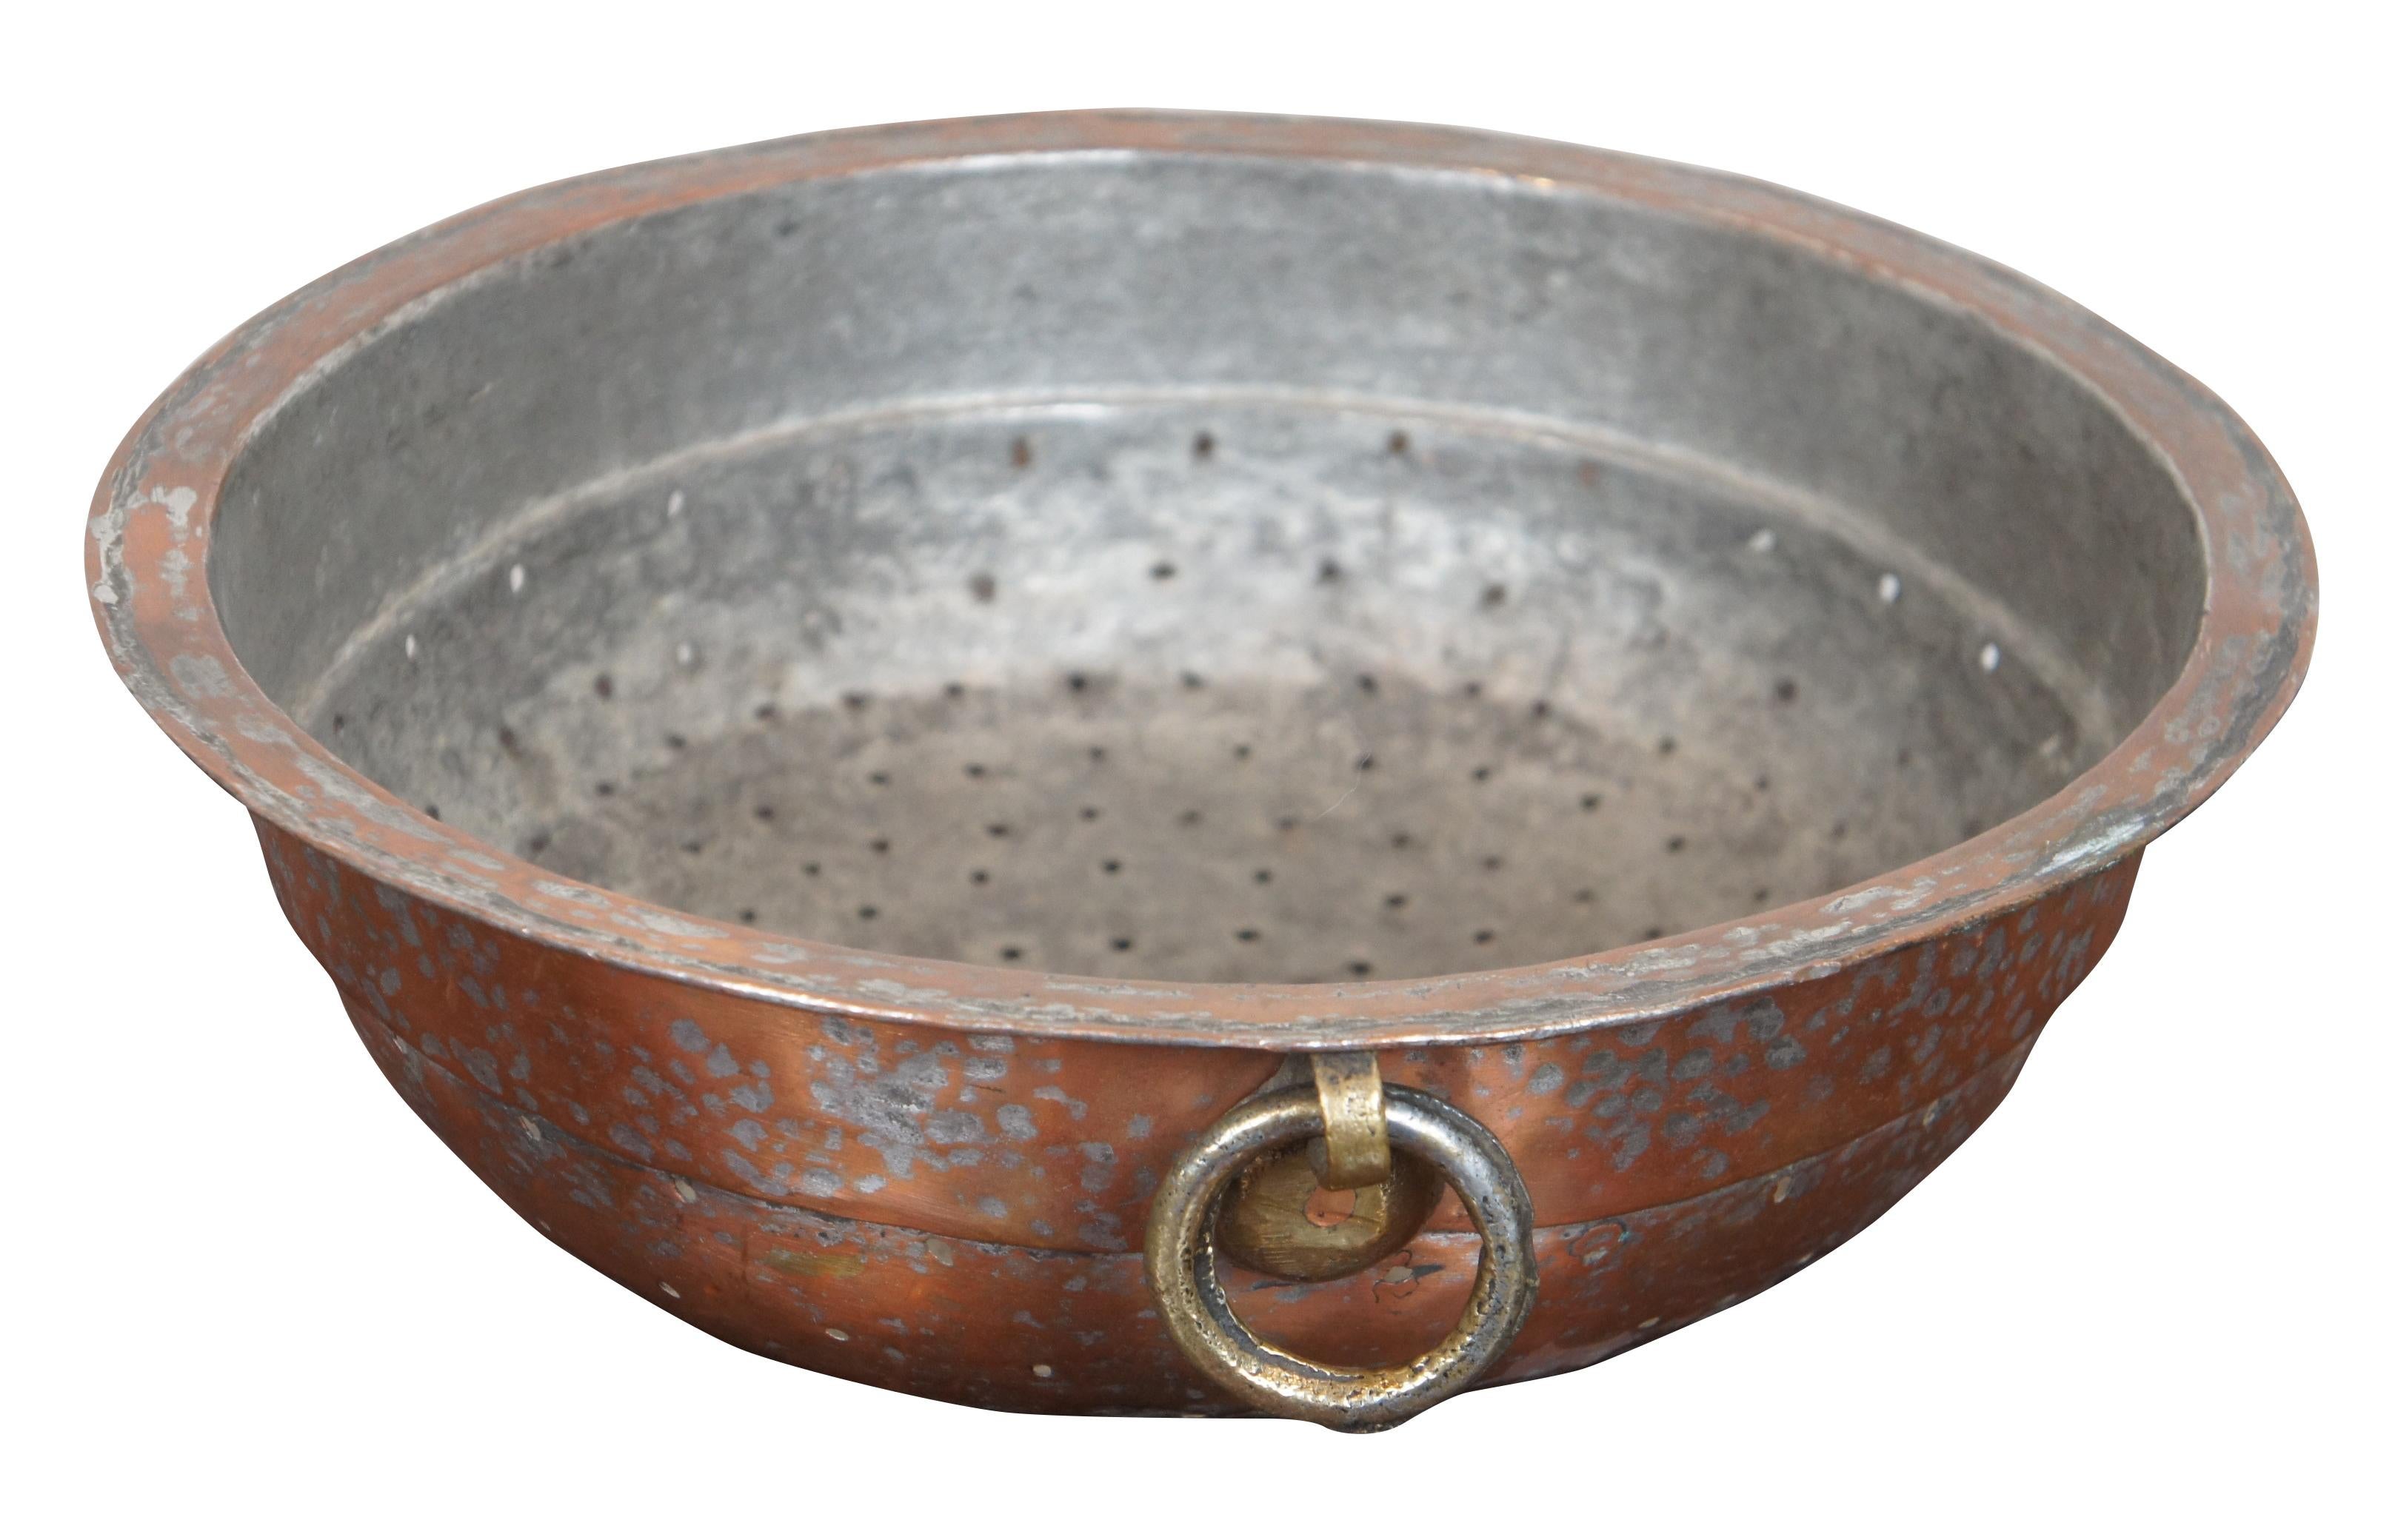 Antique French hand forged / hammered copper colander or strainer featuring dovetailing and a ring for hanging.
 